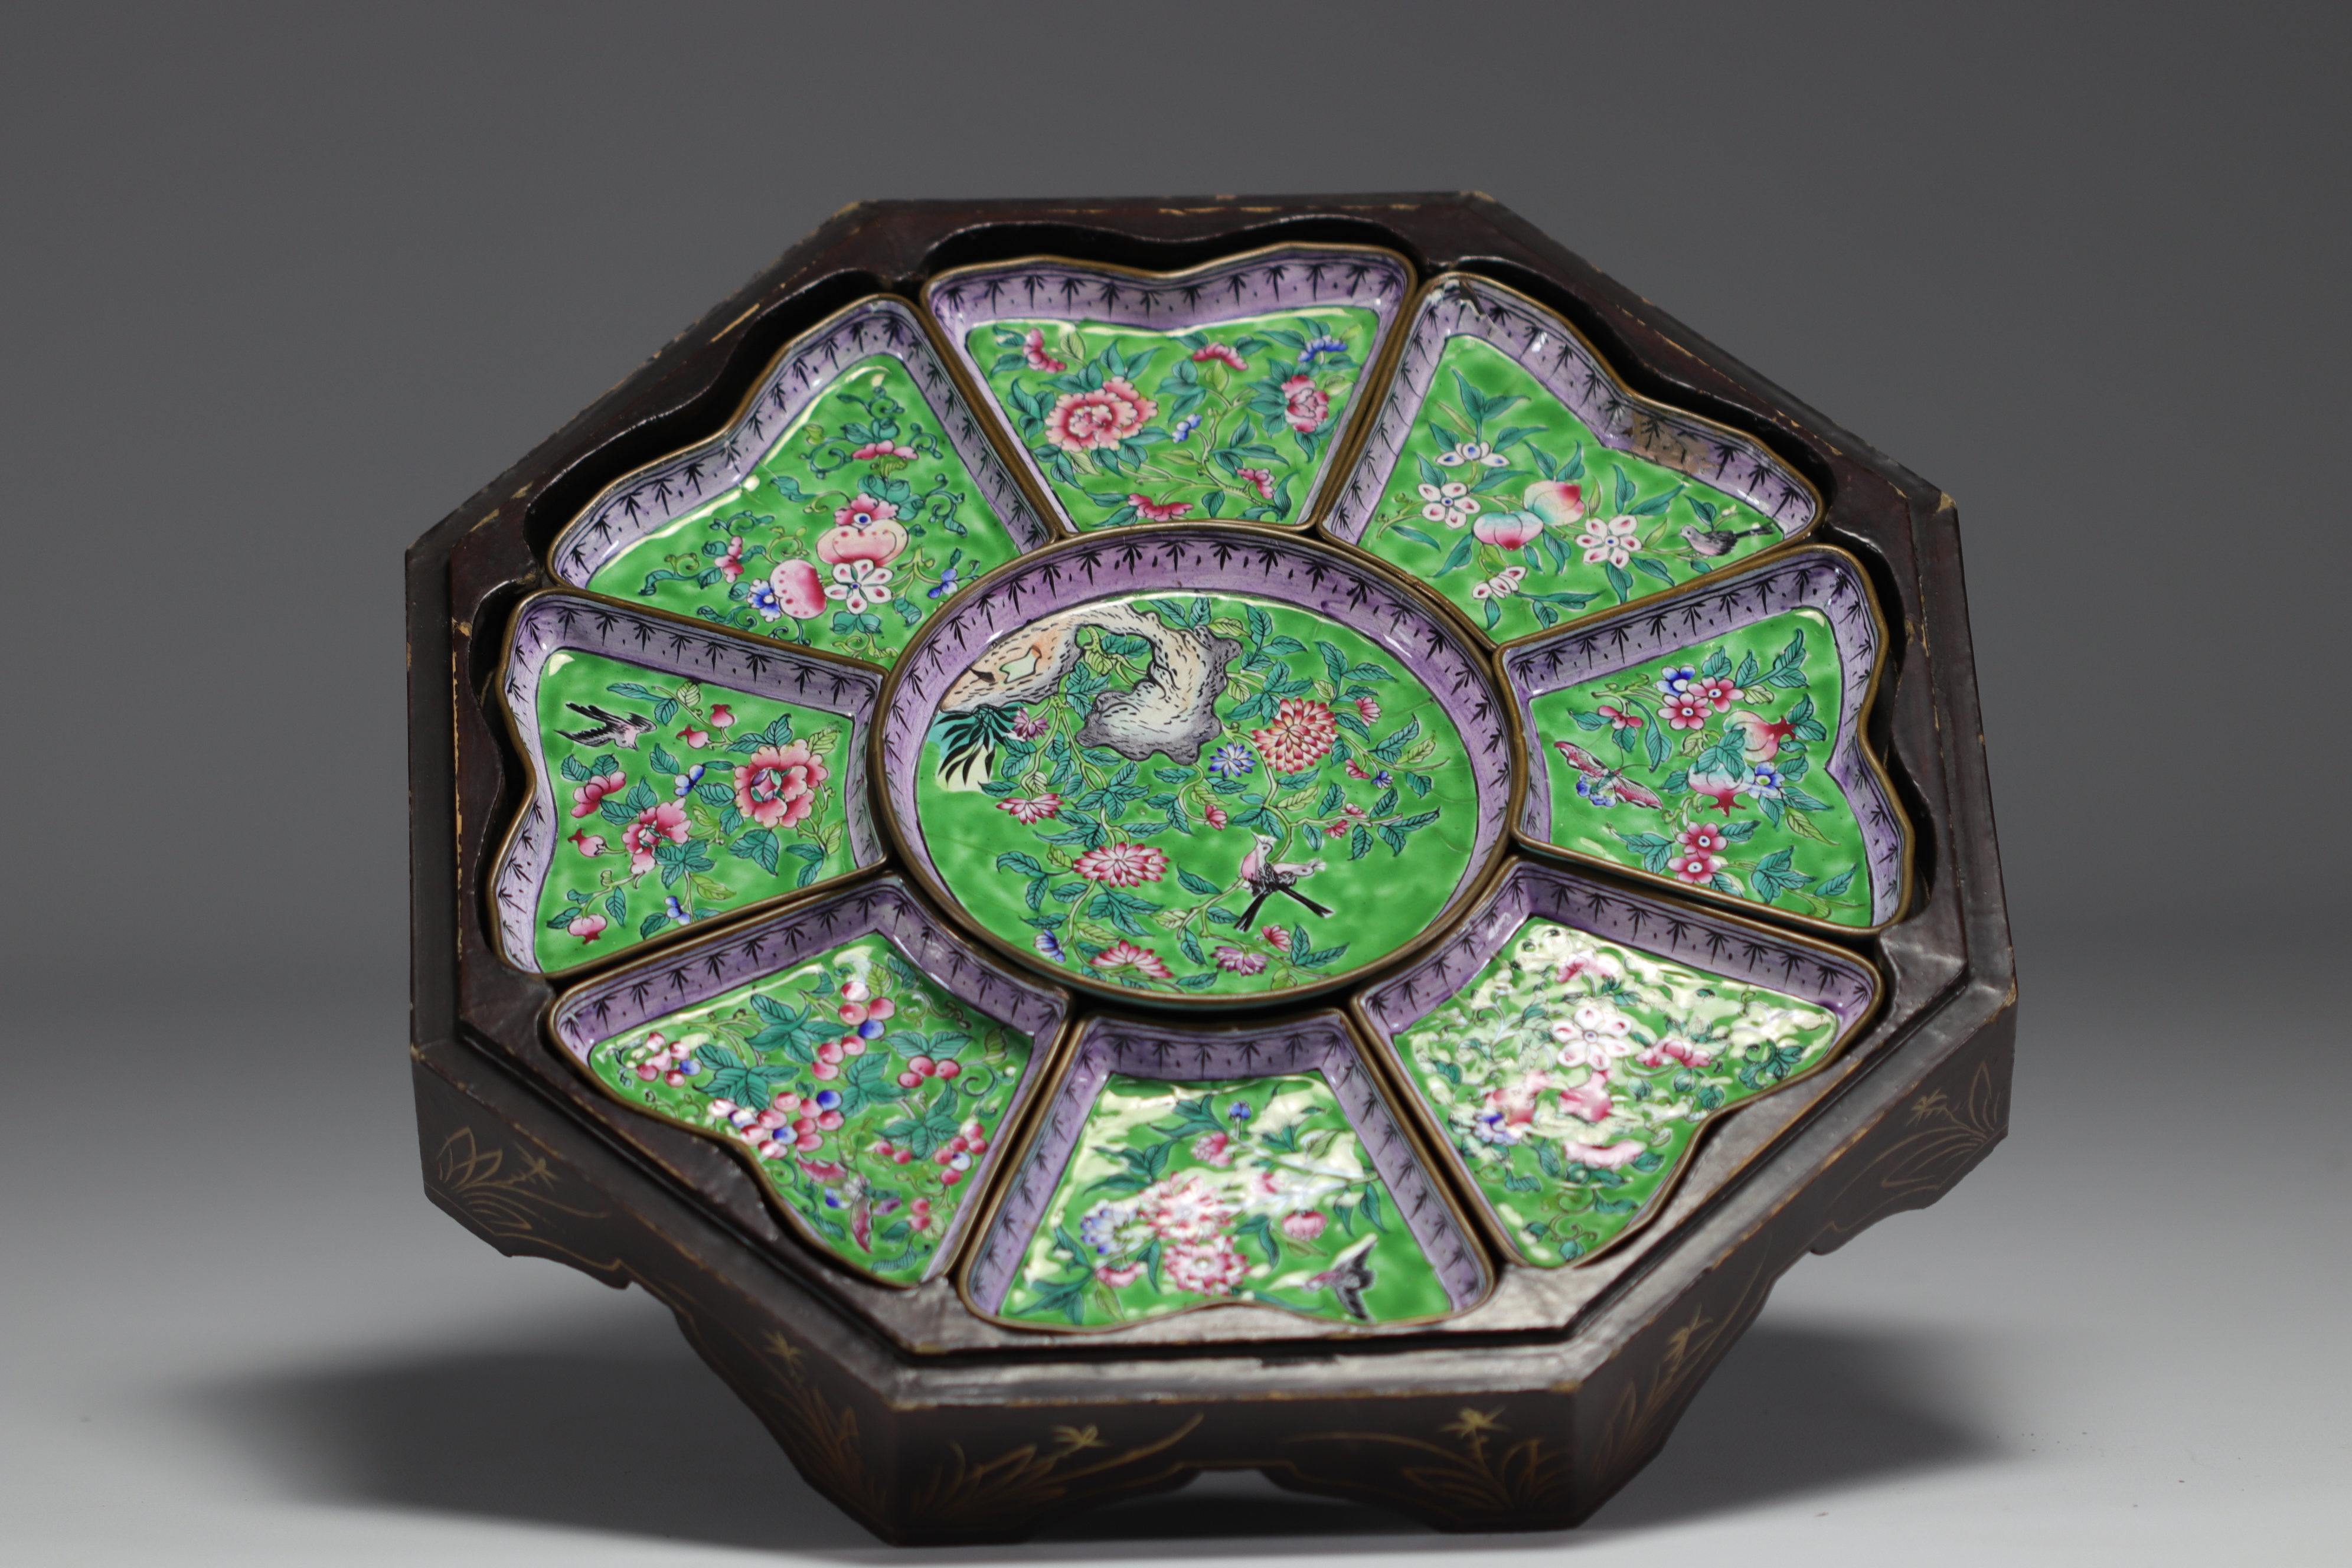 China - Set of cloisonne enamel dishes with floral and bird decor in original lacquer box, 19th cent - Image 2 of 4